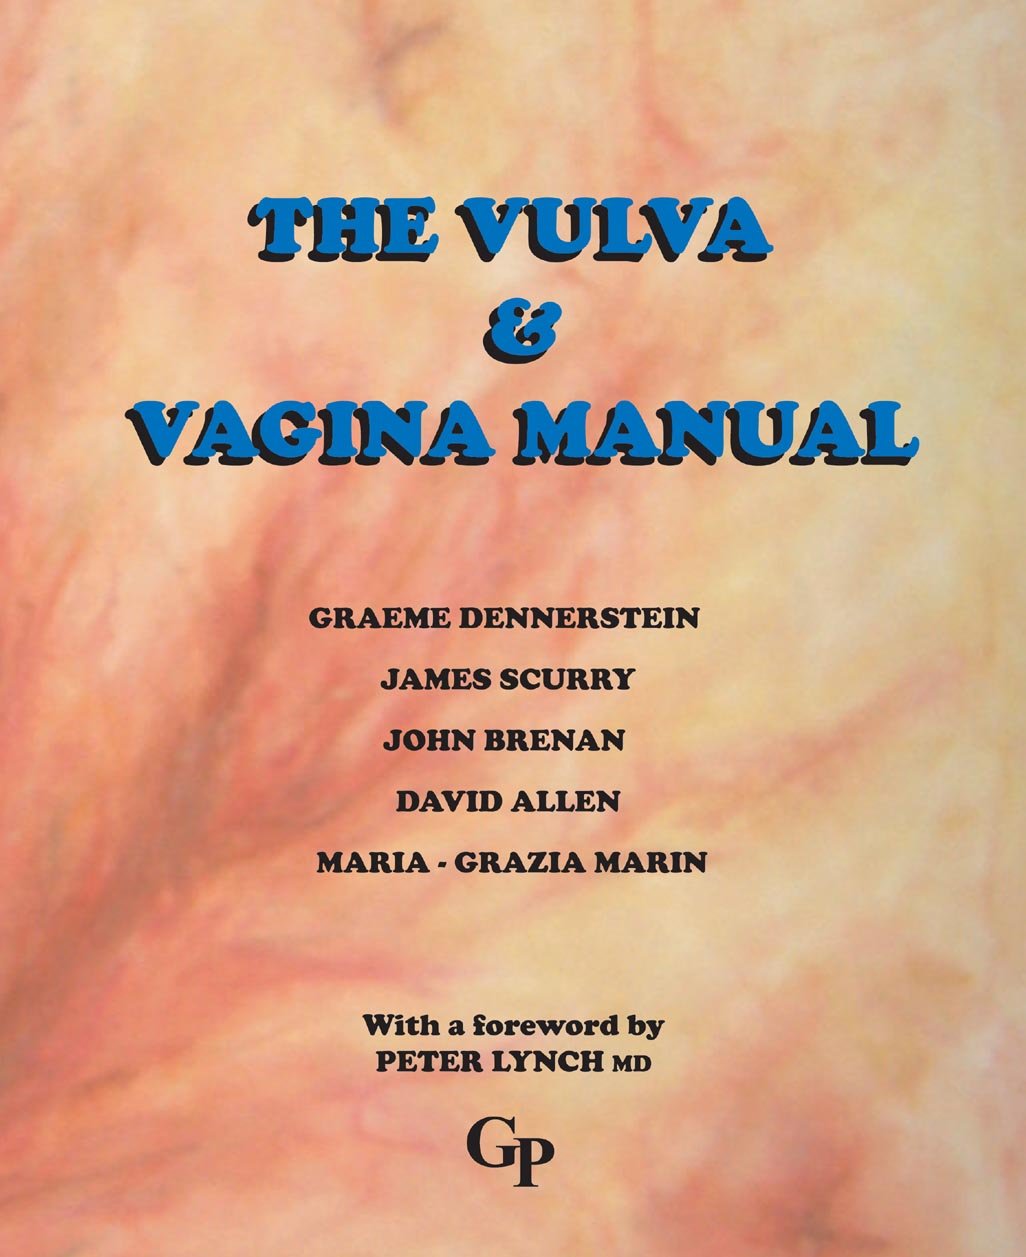 The Vulva and Vaginal Manual by Graeme Dennerstein